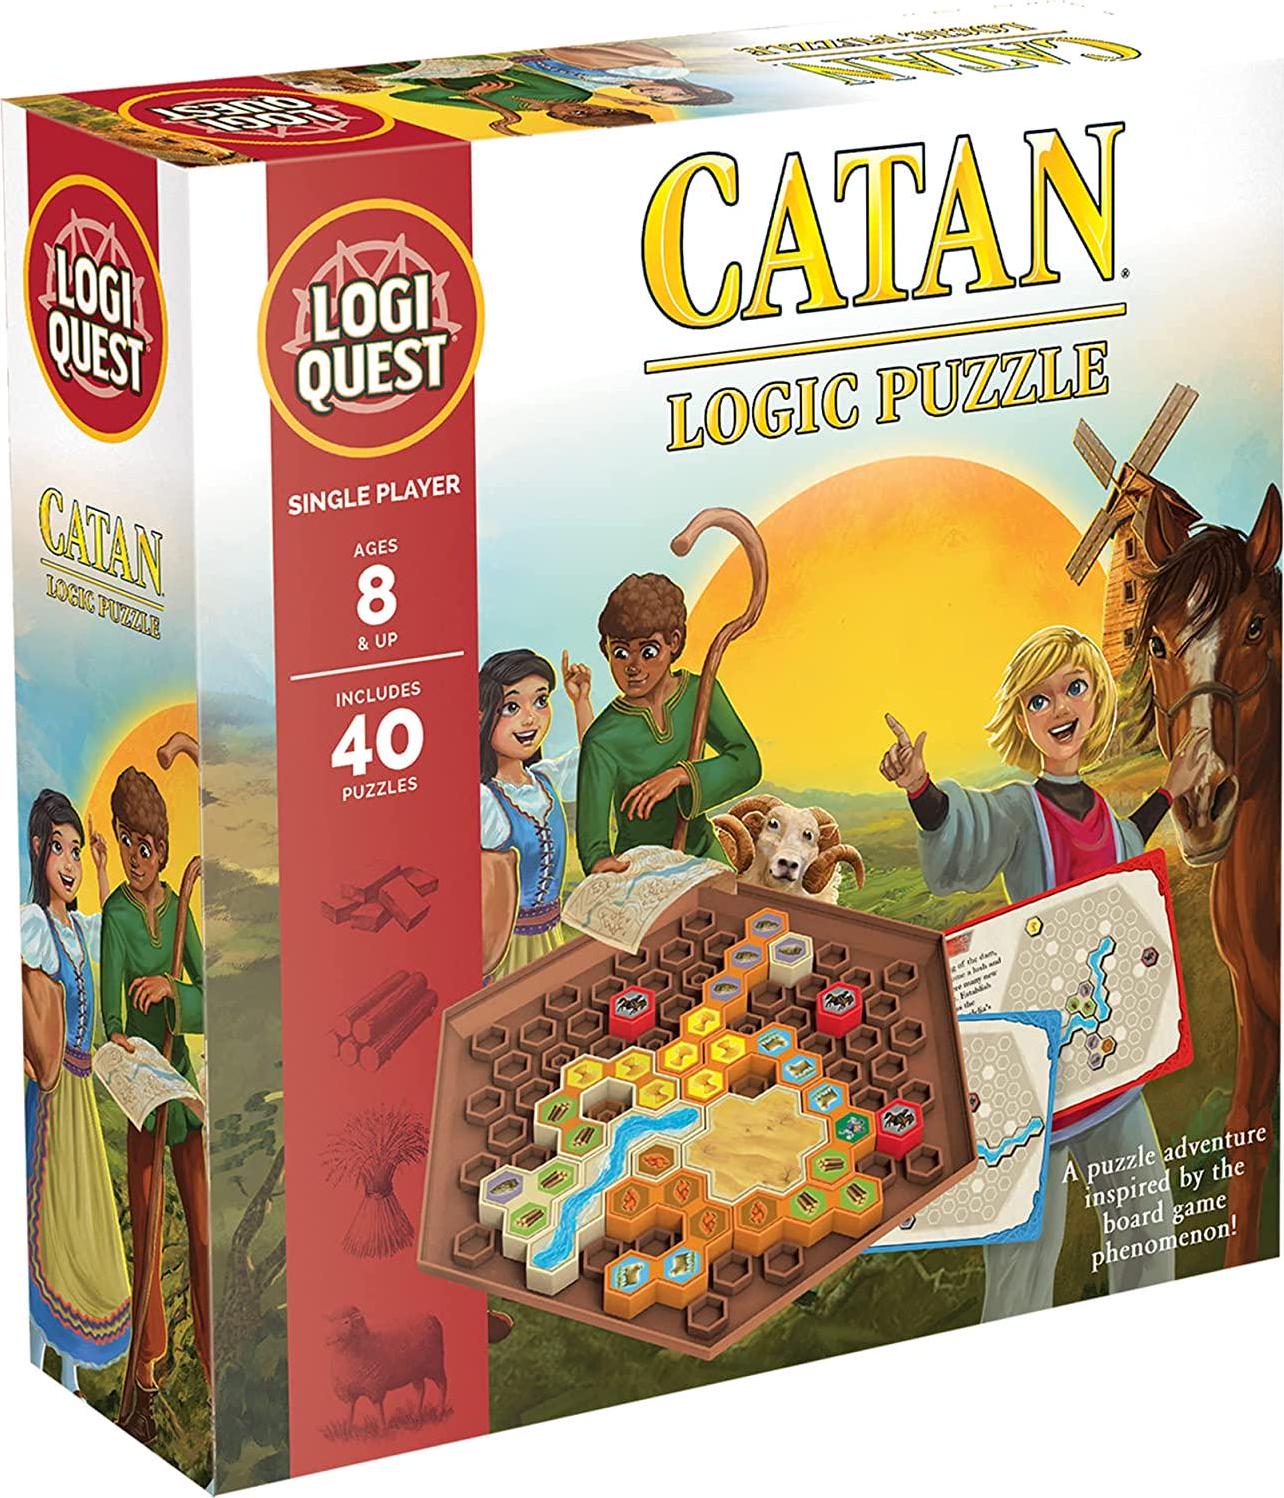 Mixlore, LogiQuest Catan Logic Puzzle A Puzzle Adventure Inspired by The Board Game Phenomenon